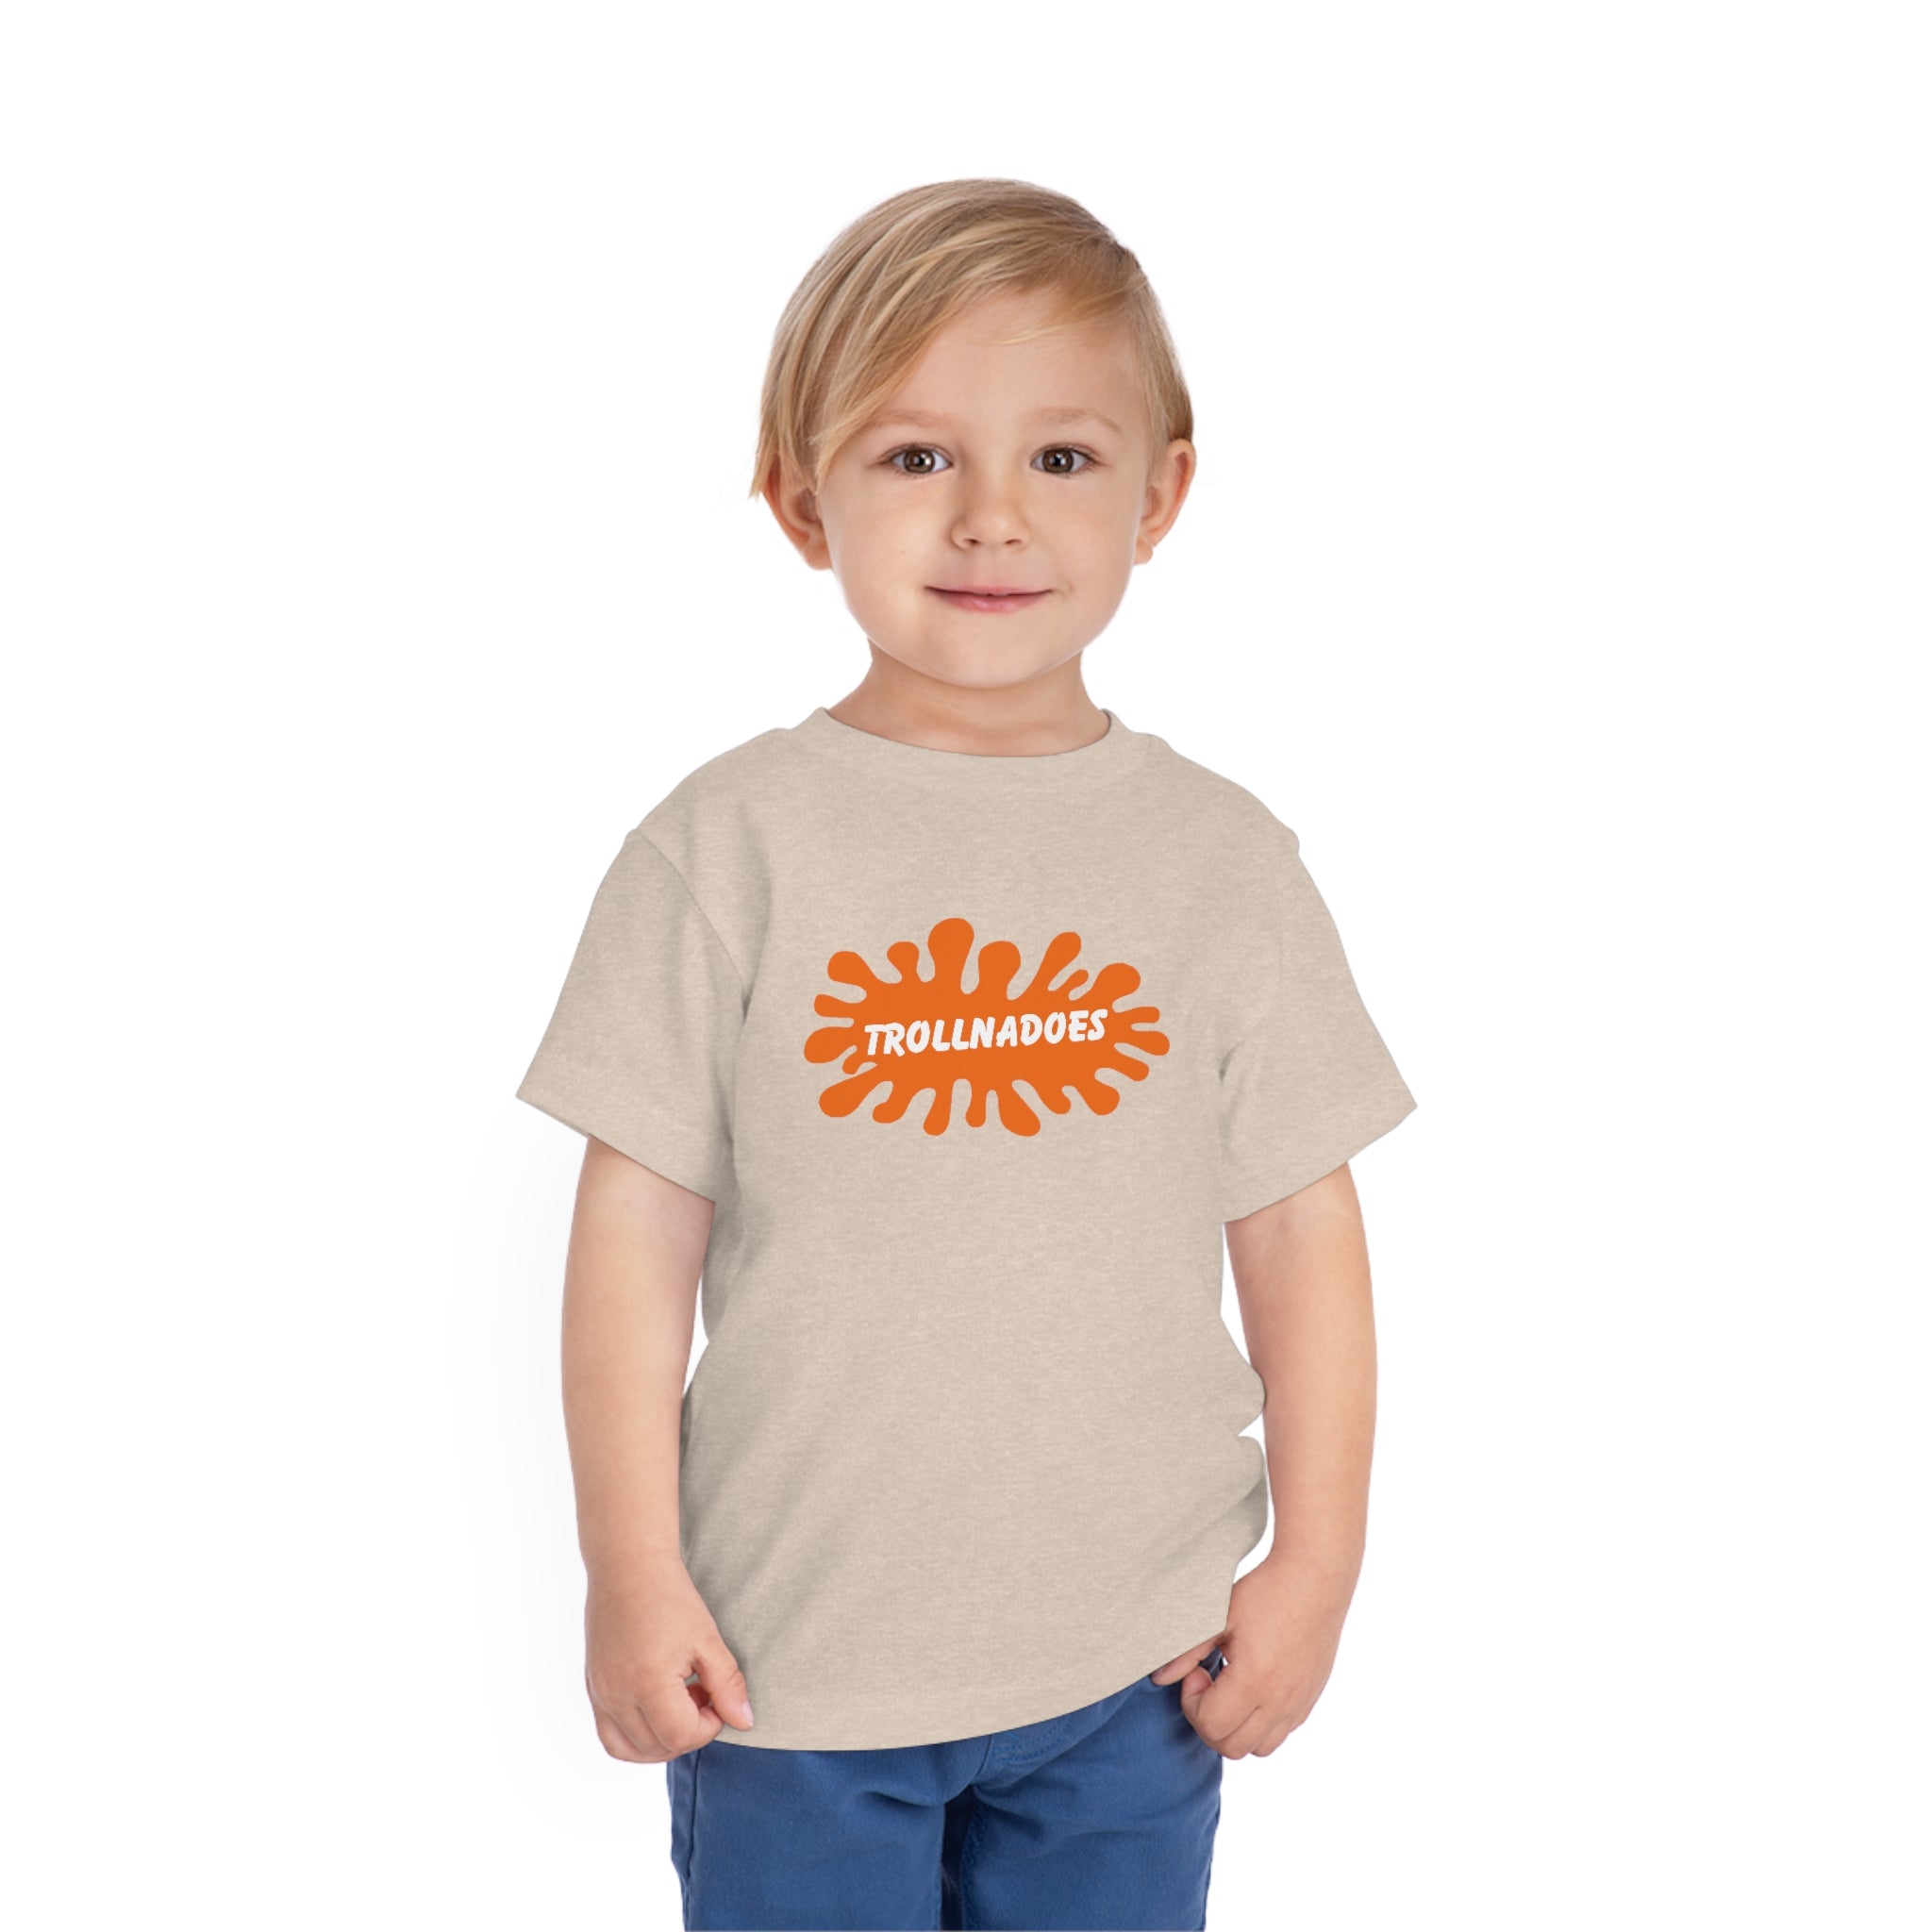 Trollnadoes Toddler Tee 